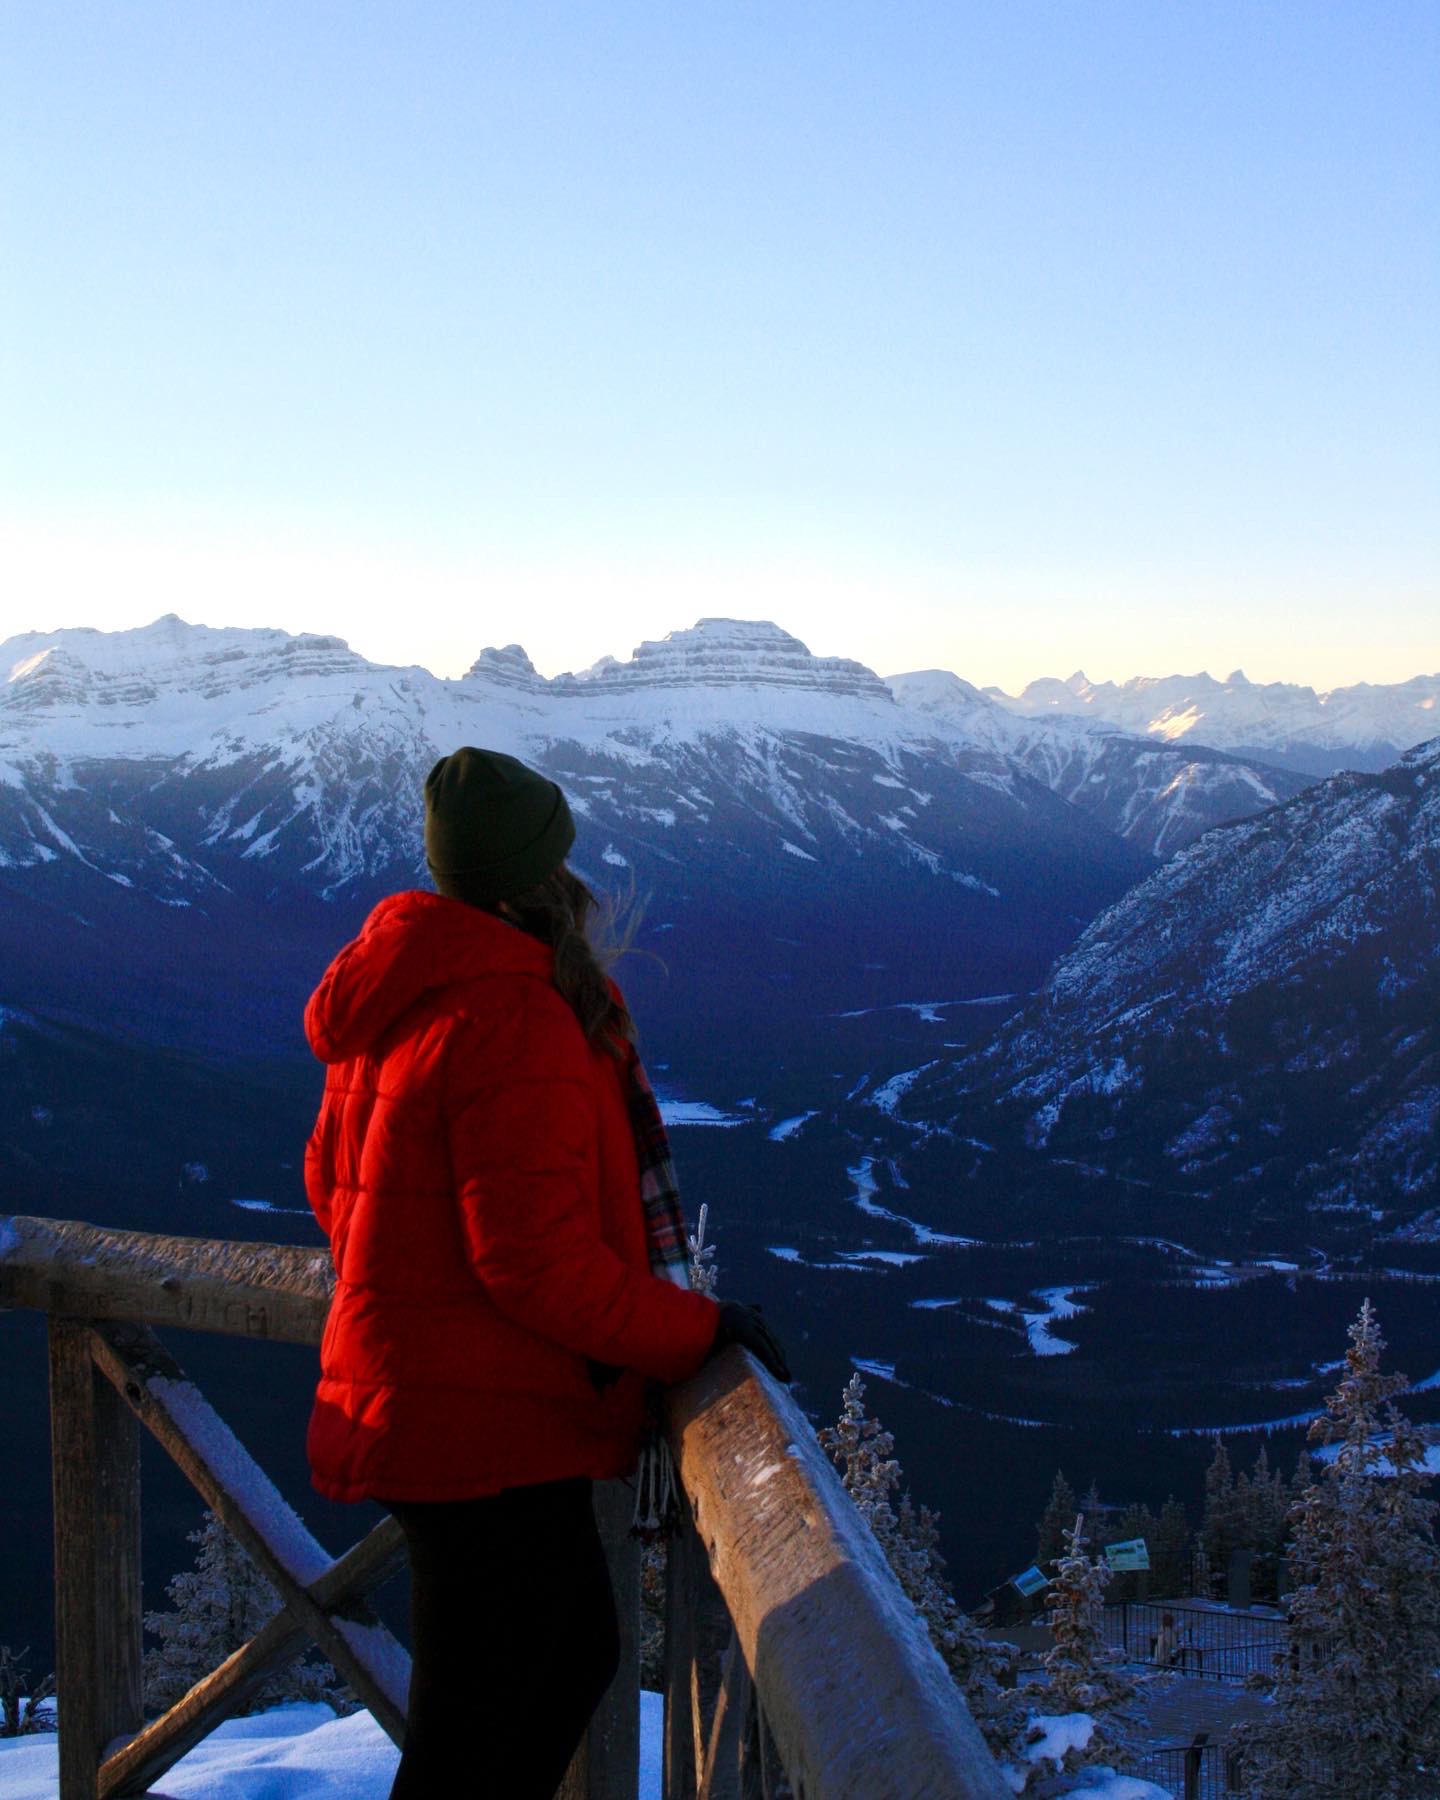 Girl in Red Coat Leaning on a Railing Overlooking Snow- Covered Mountains